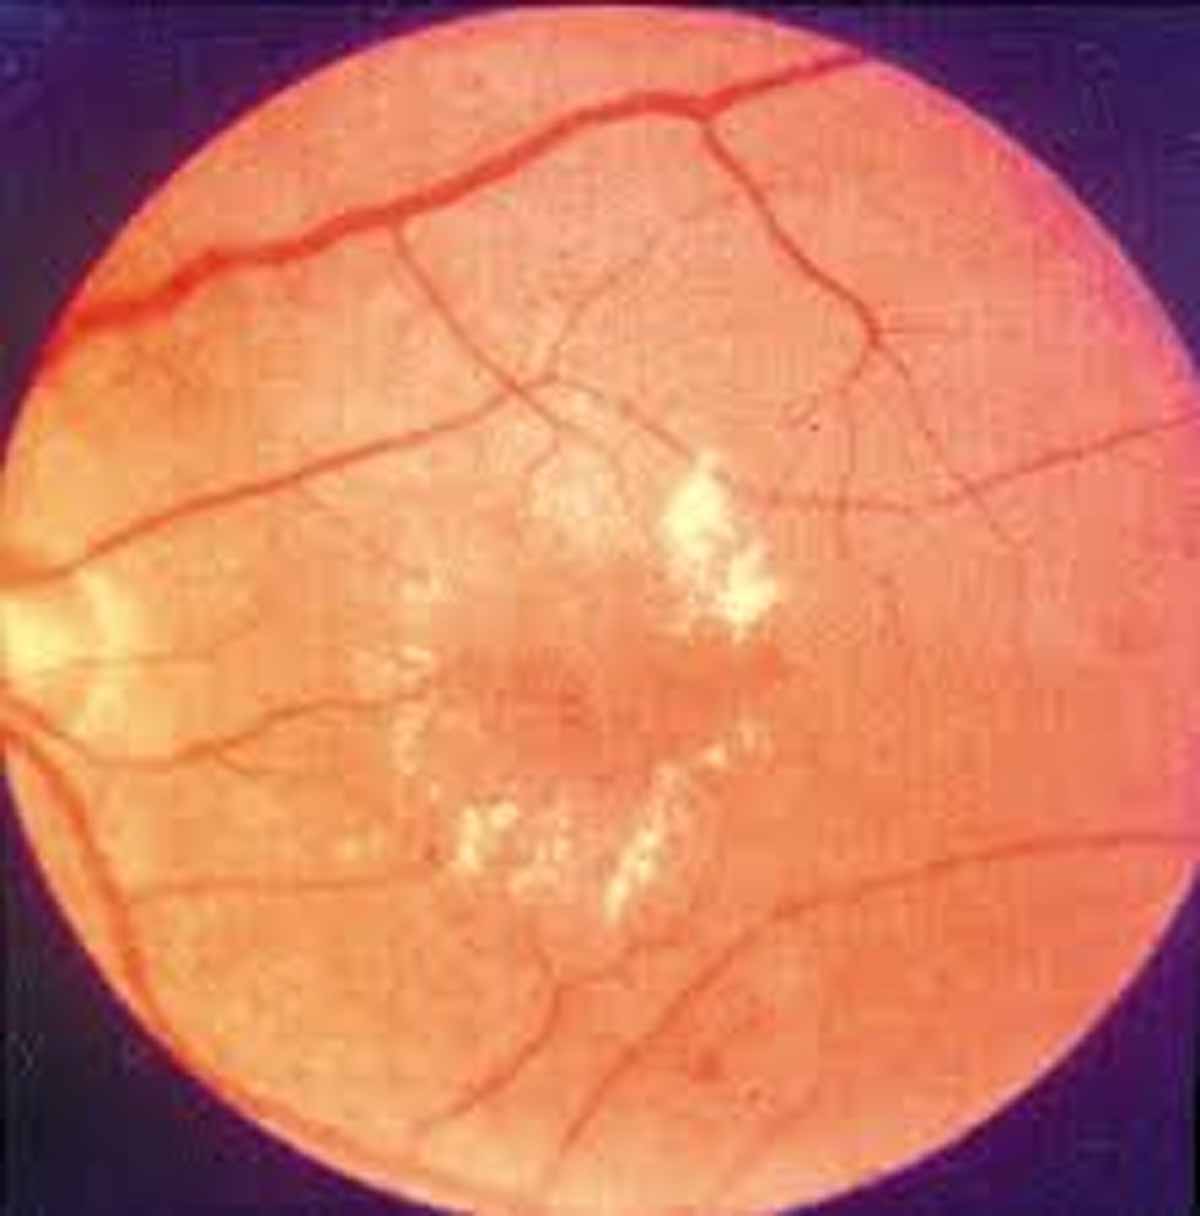 New therapeutic target may reverse Diabetic retinopathy, finds a study